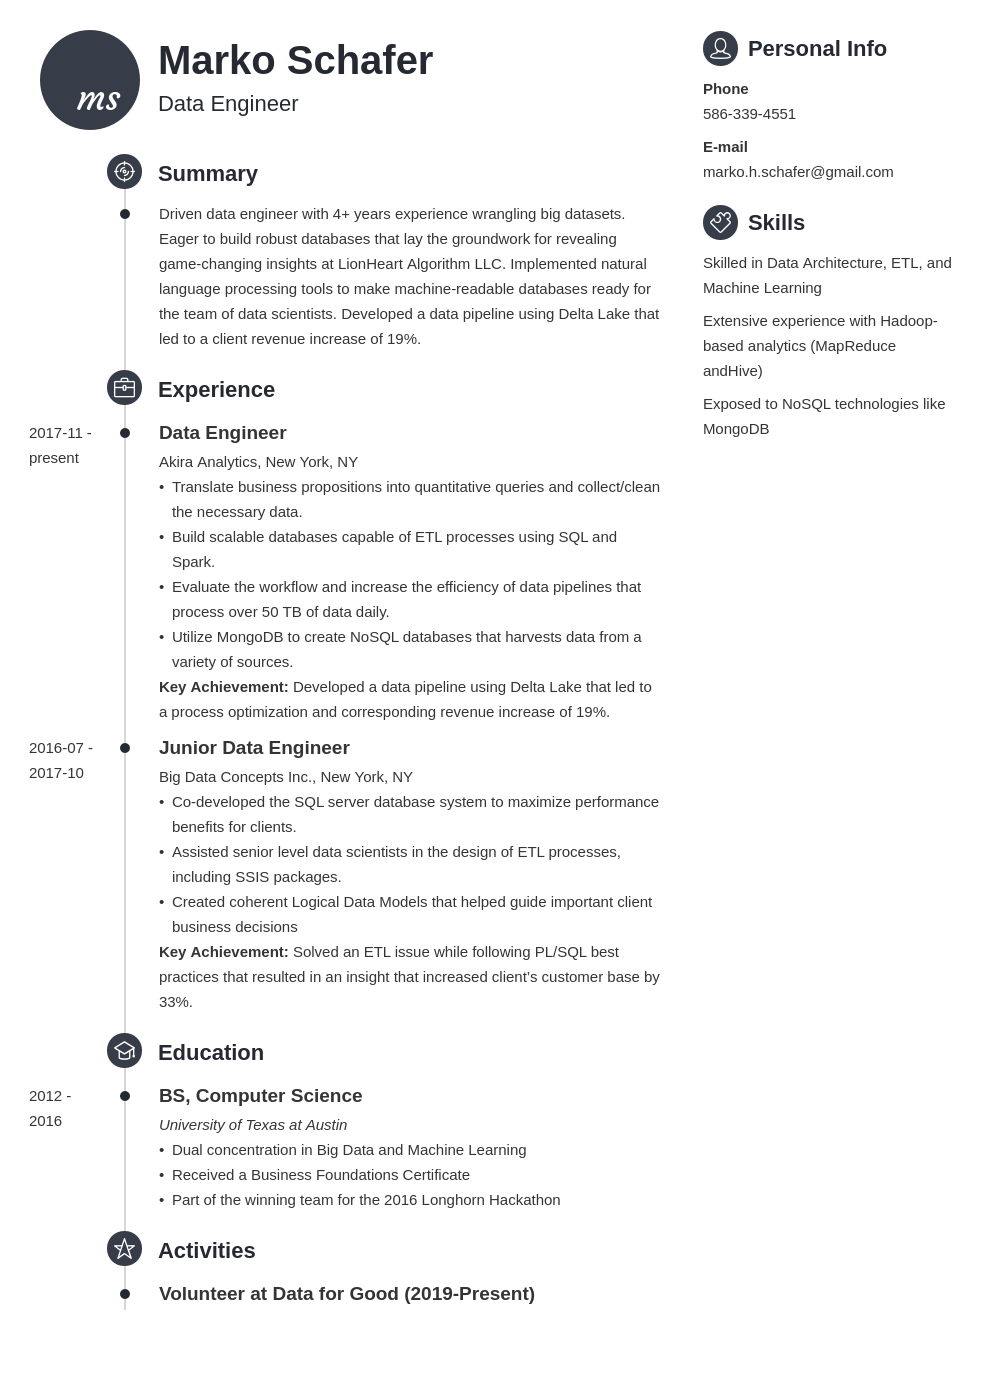 Data Engineer Resume: Sample and Guide [20+ Tips]